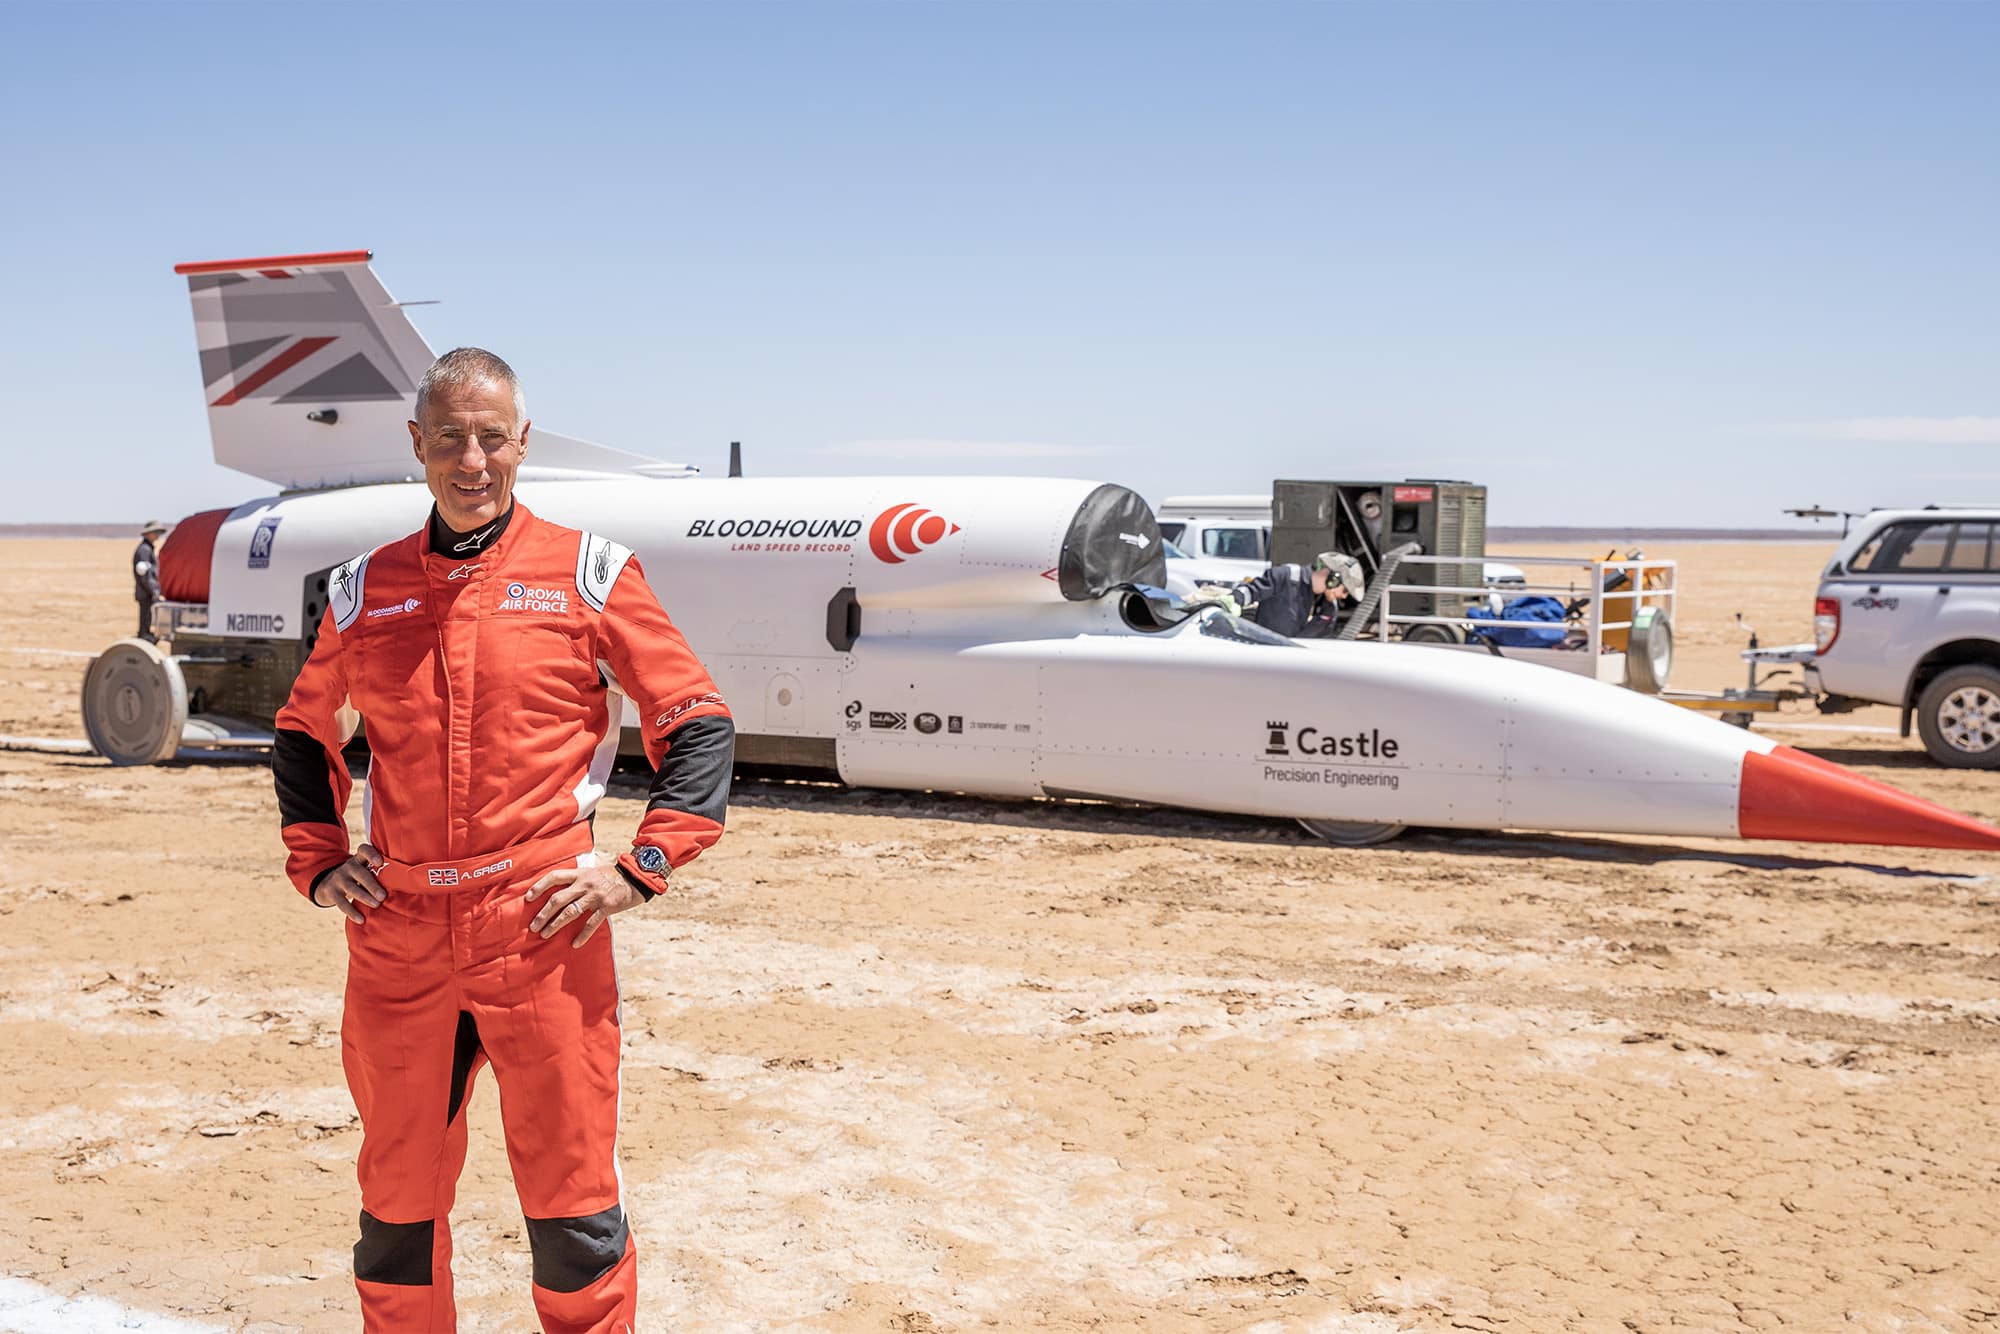 Andy Green, RAF Pilot and man behind the wheel of the Bloodhound LSR car